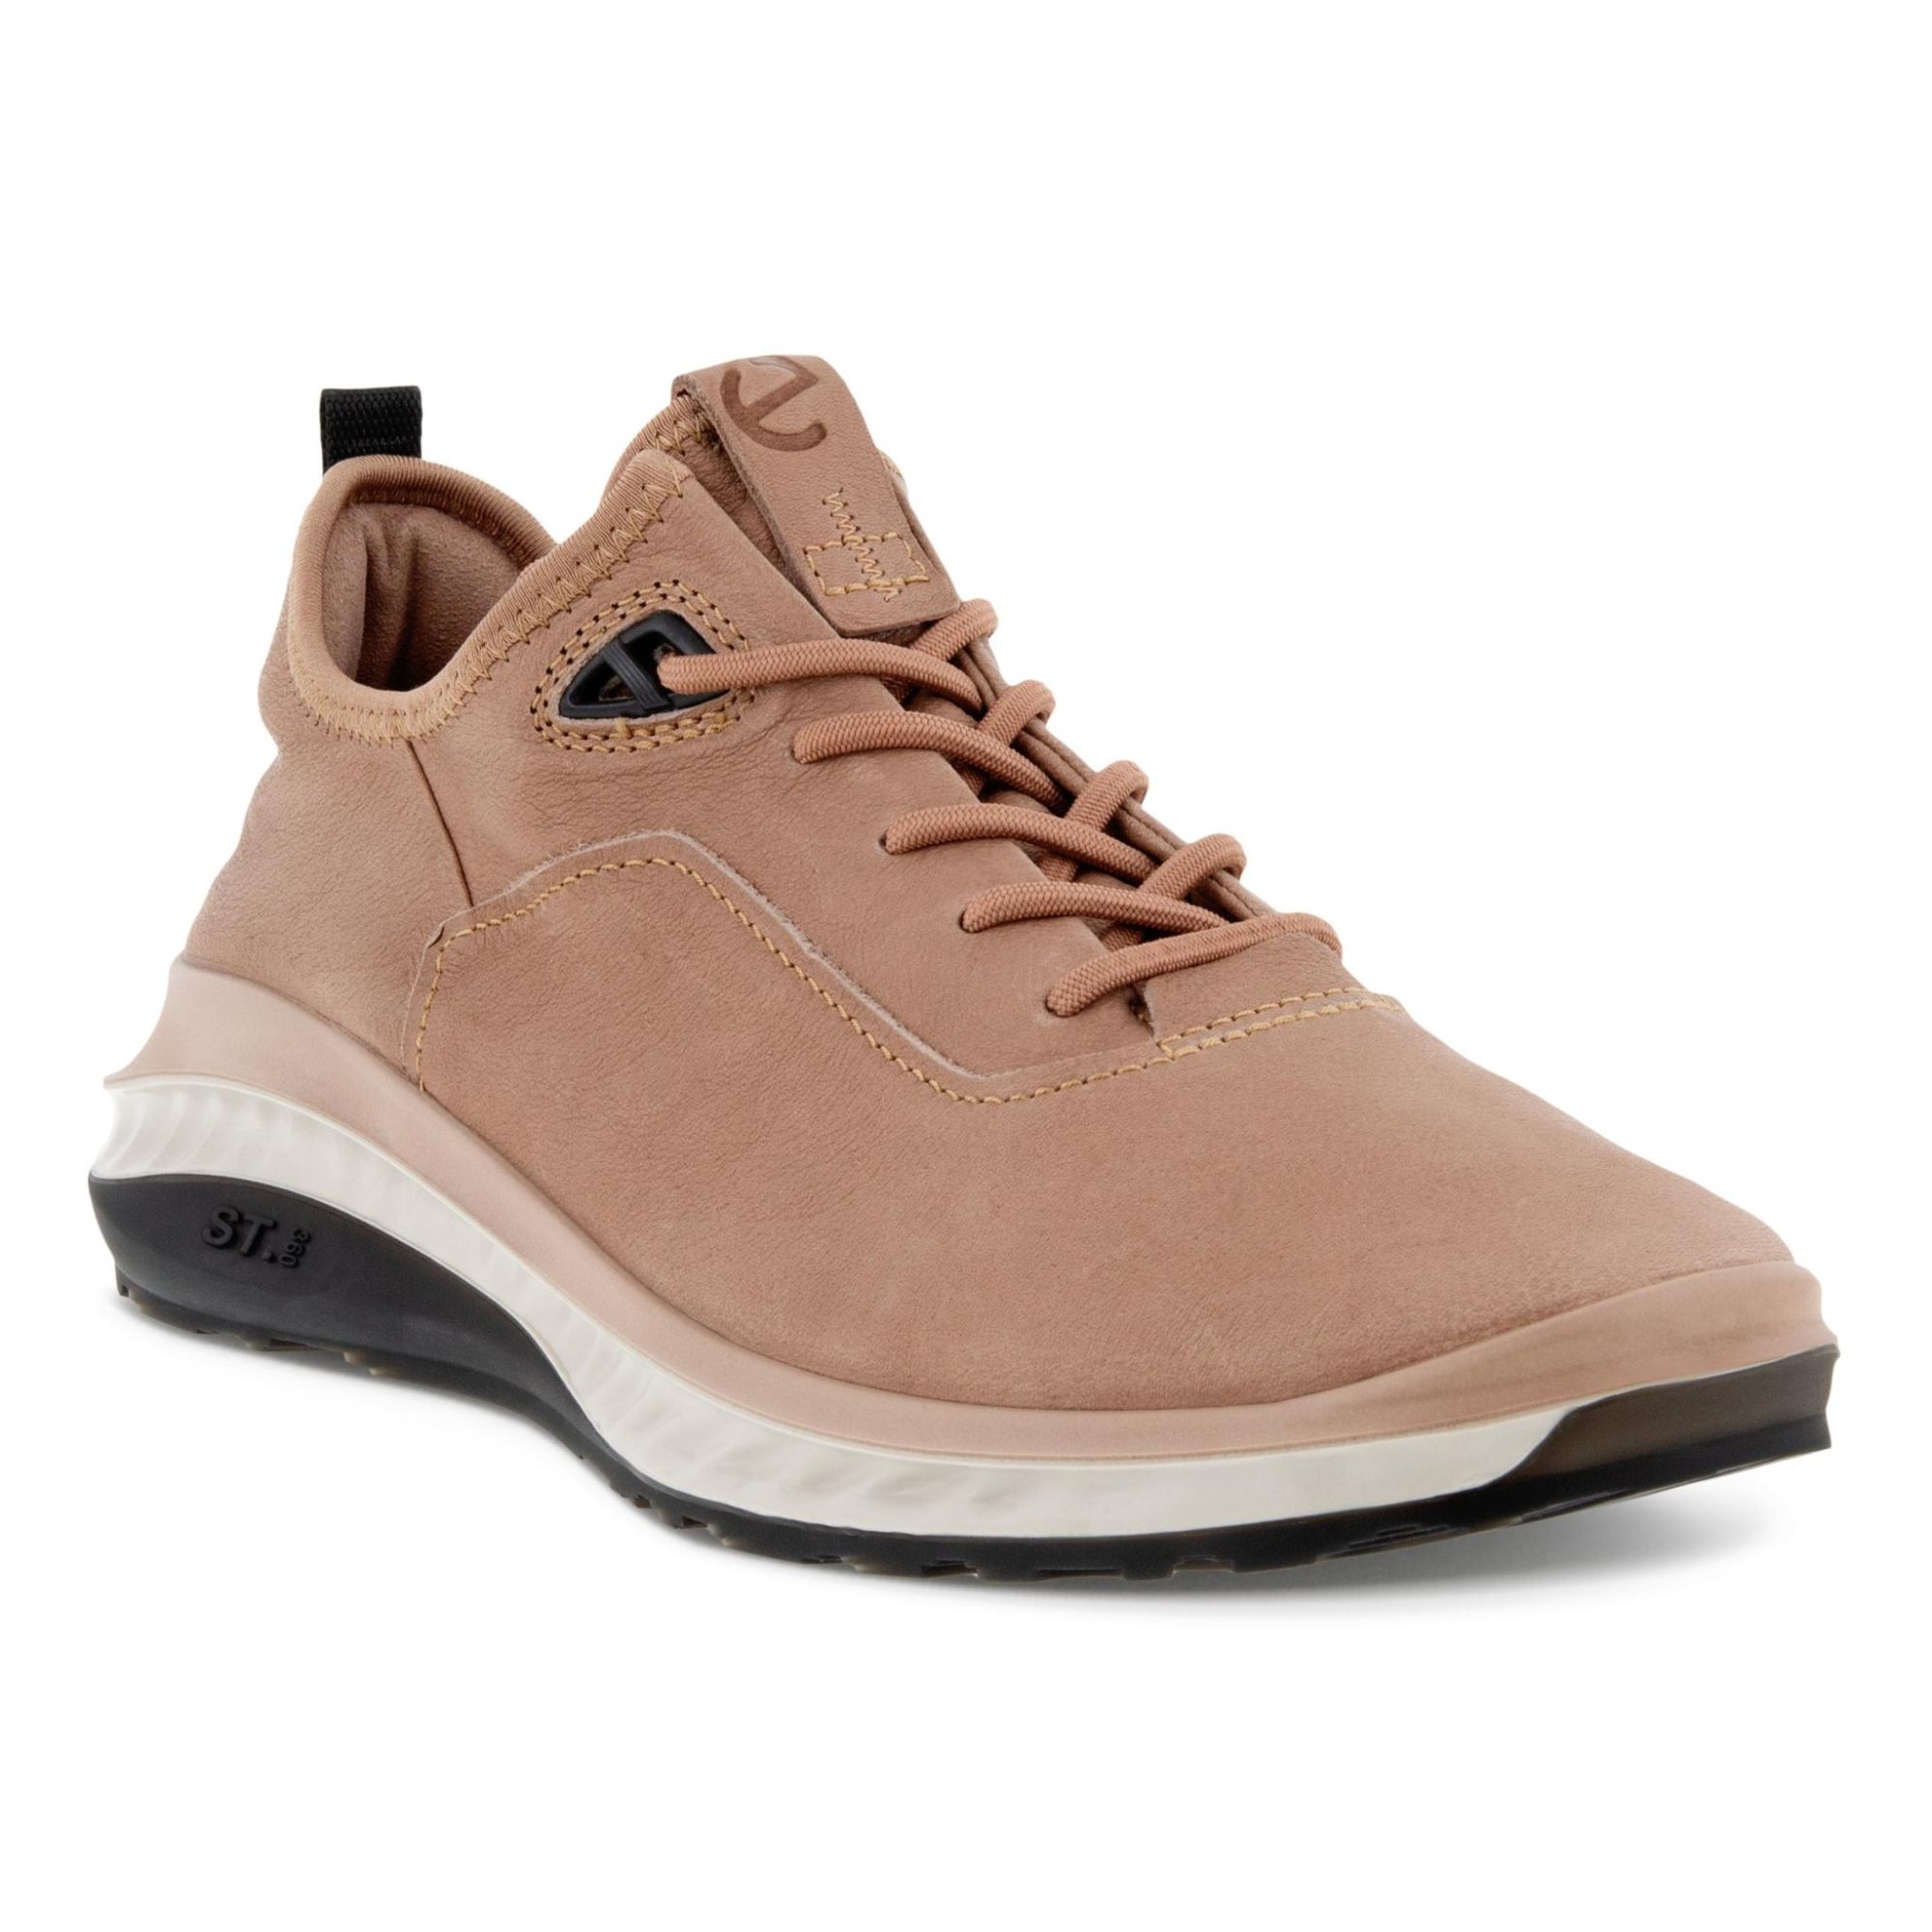 Ecco ST.360 M Sneaker 40 - Products - Veryk Mall - Veryk Mall